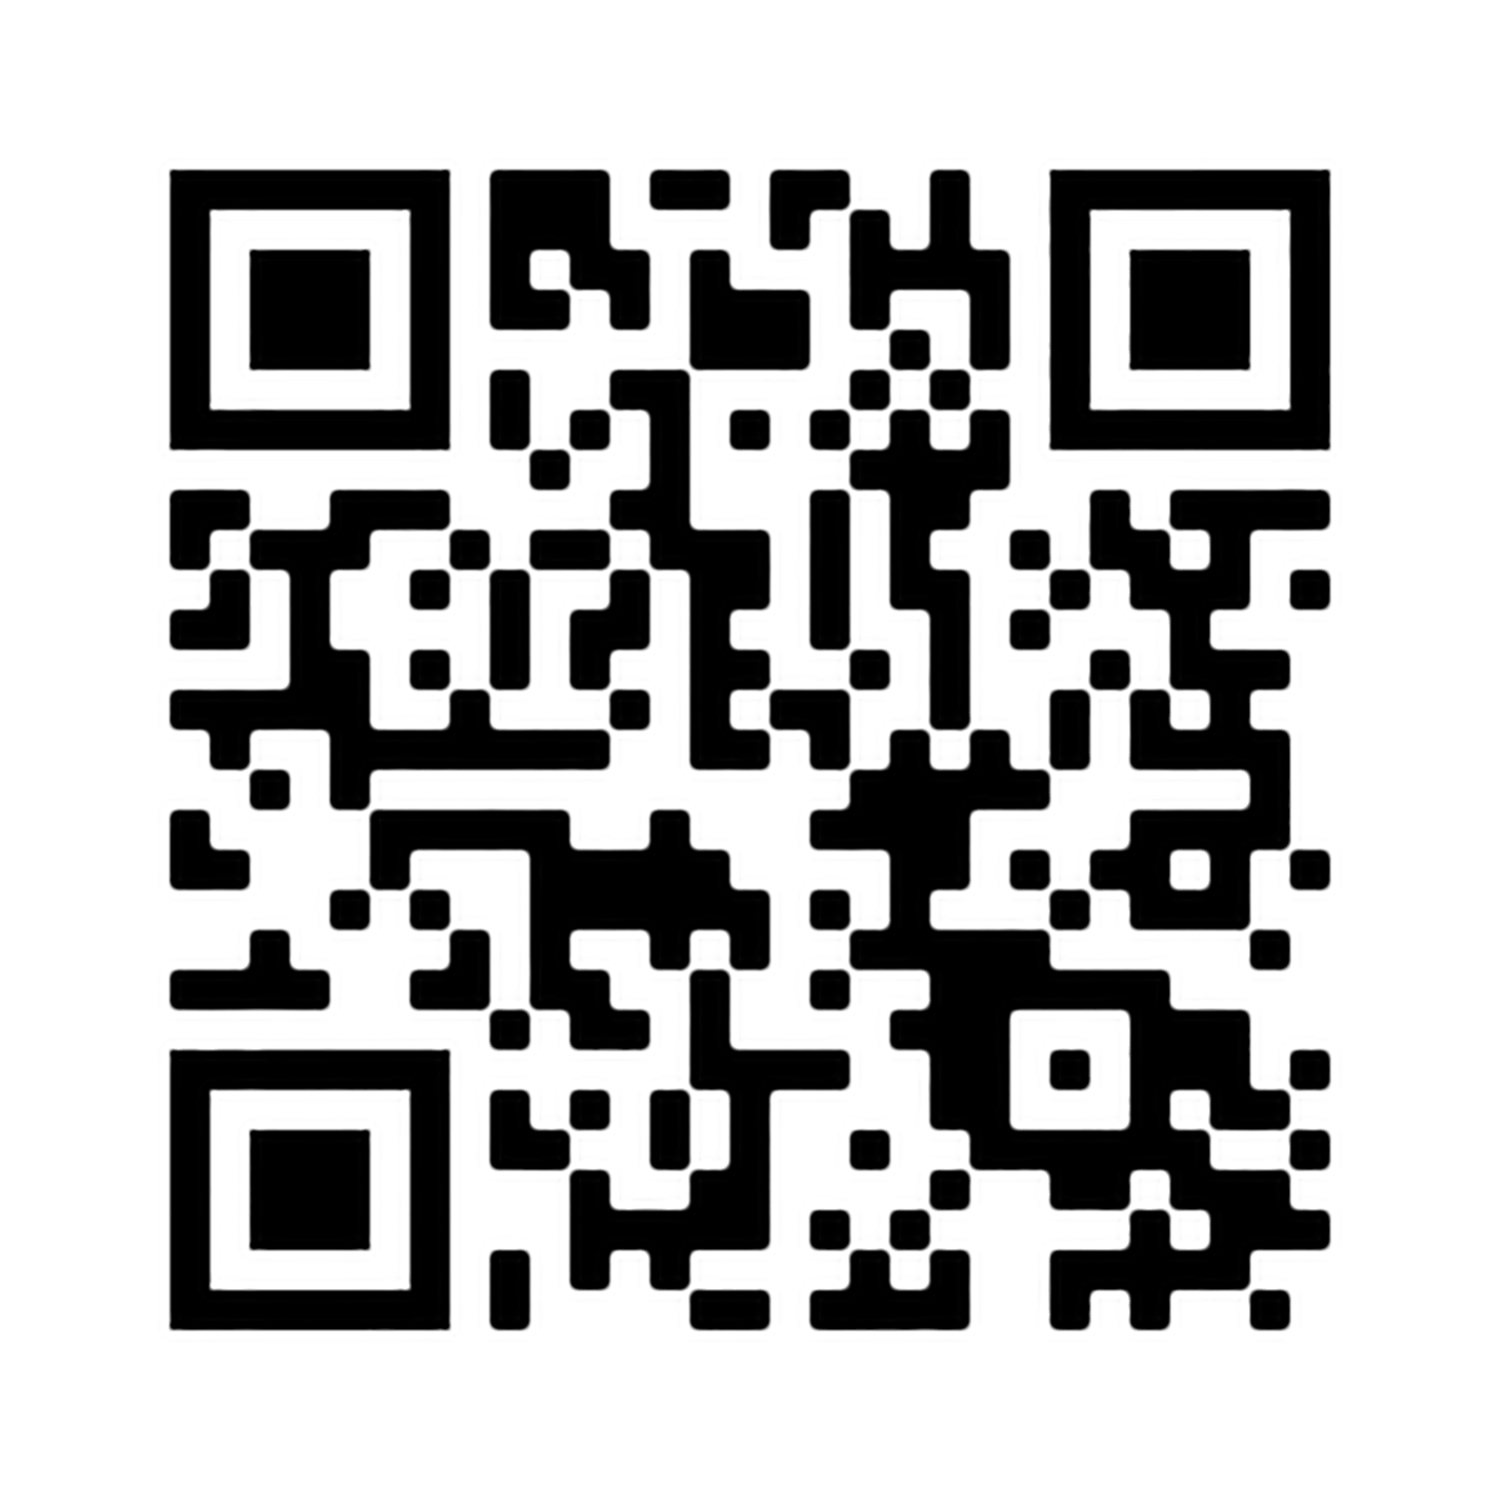 Try out the new Tsubaki Chain Configurator by using the QR Code.